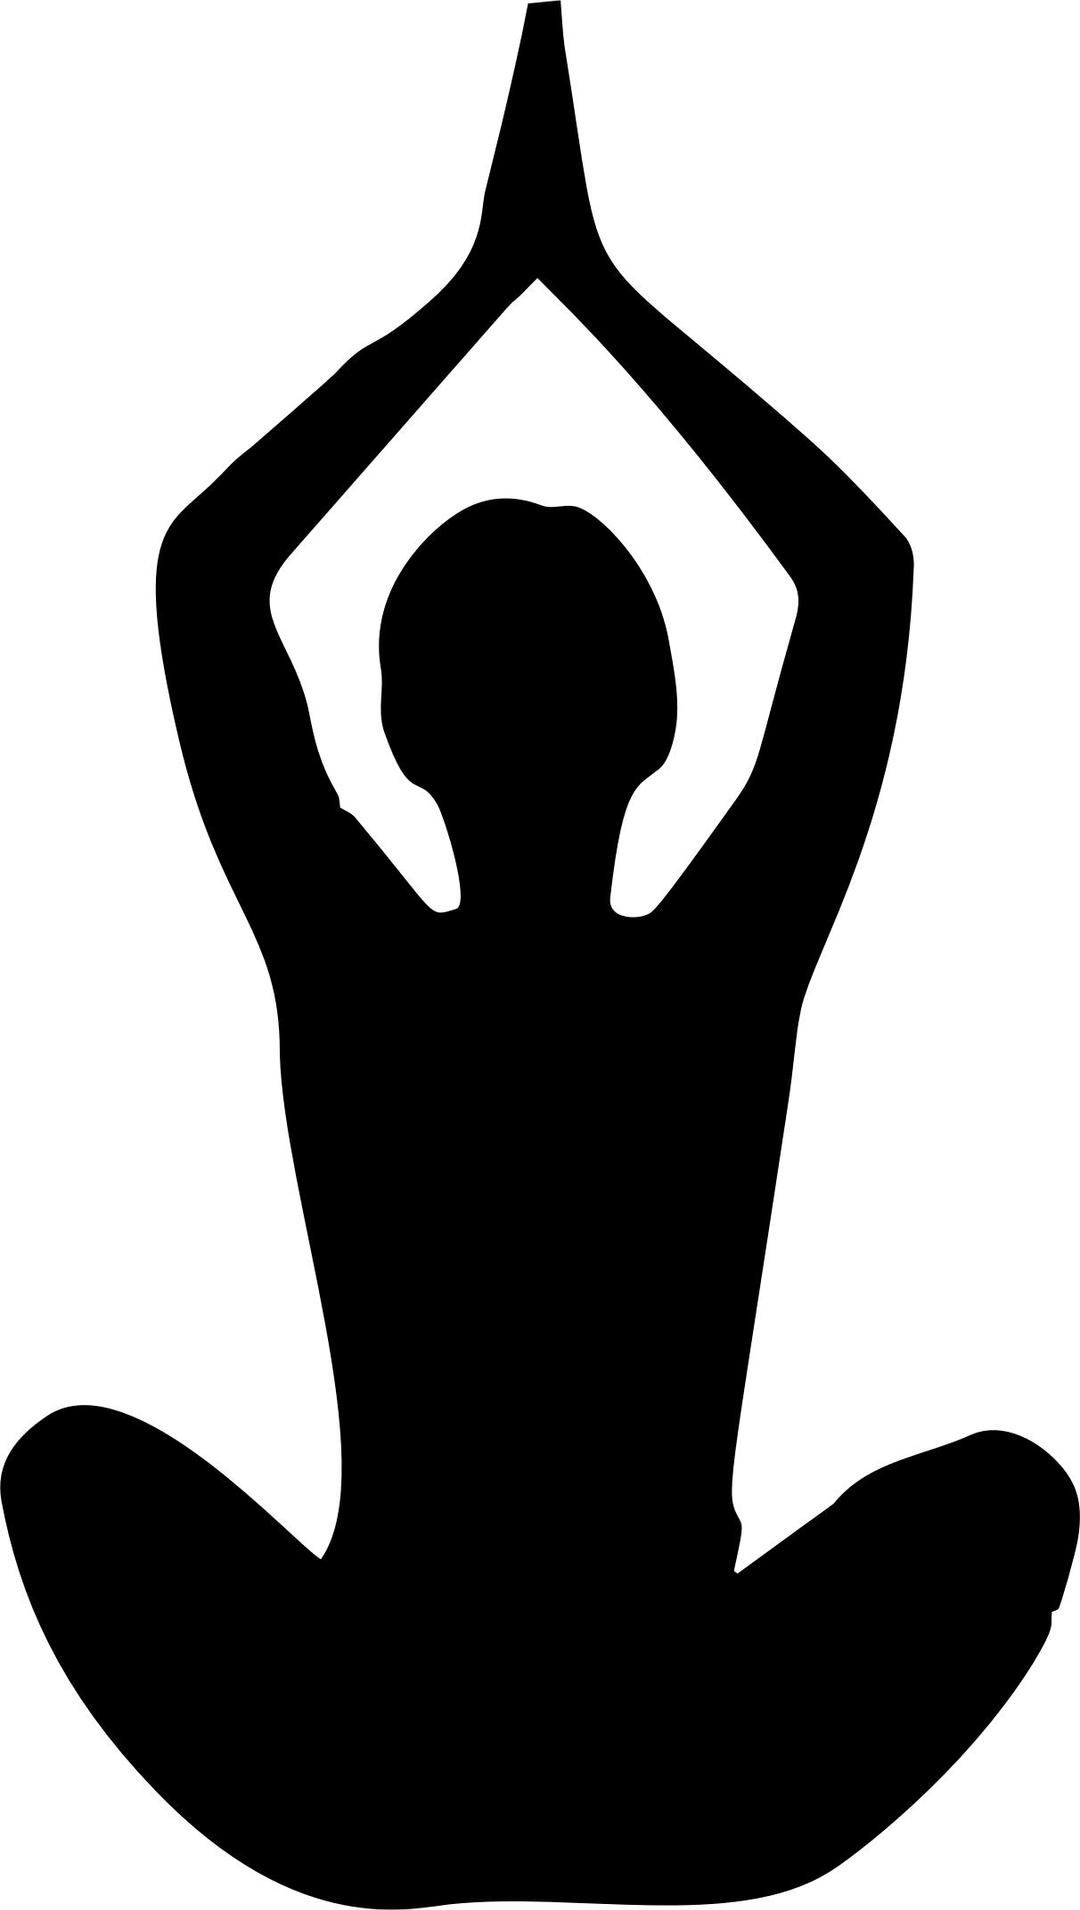 Silhouettes Woman Costume Practicing Yoga Stretching Stock Vector